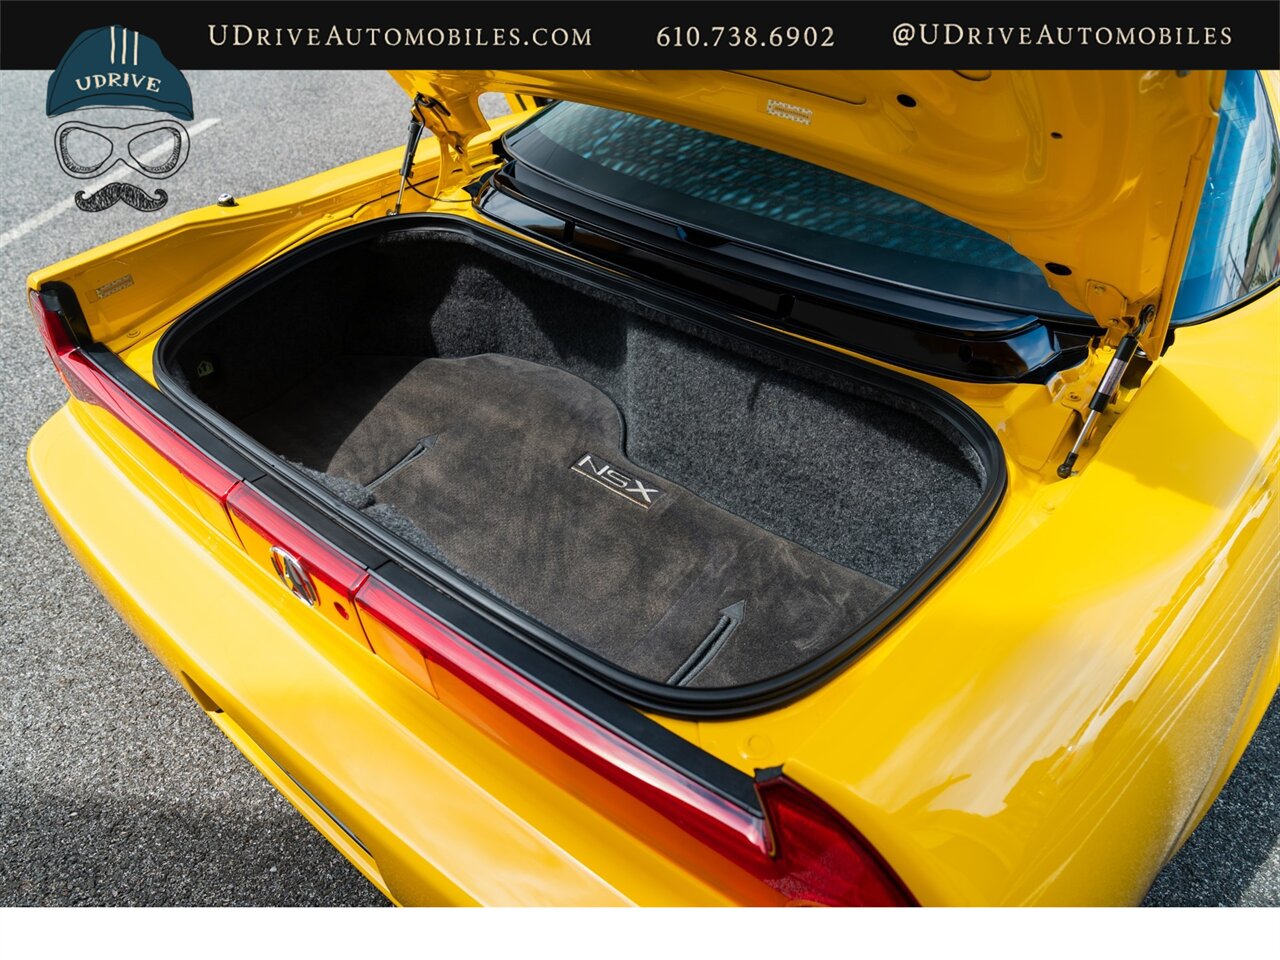 2003 Acura NSX NSX-T  Spa Yellow over Yellow Lthr 1 of 13 Produced - Photo 58 - West Chester, PA 19382